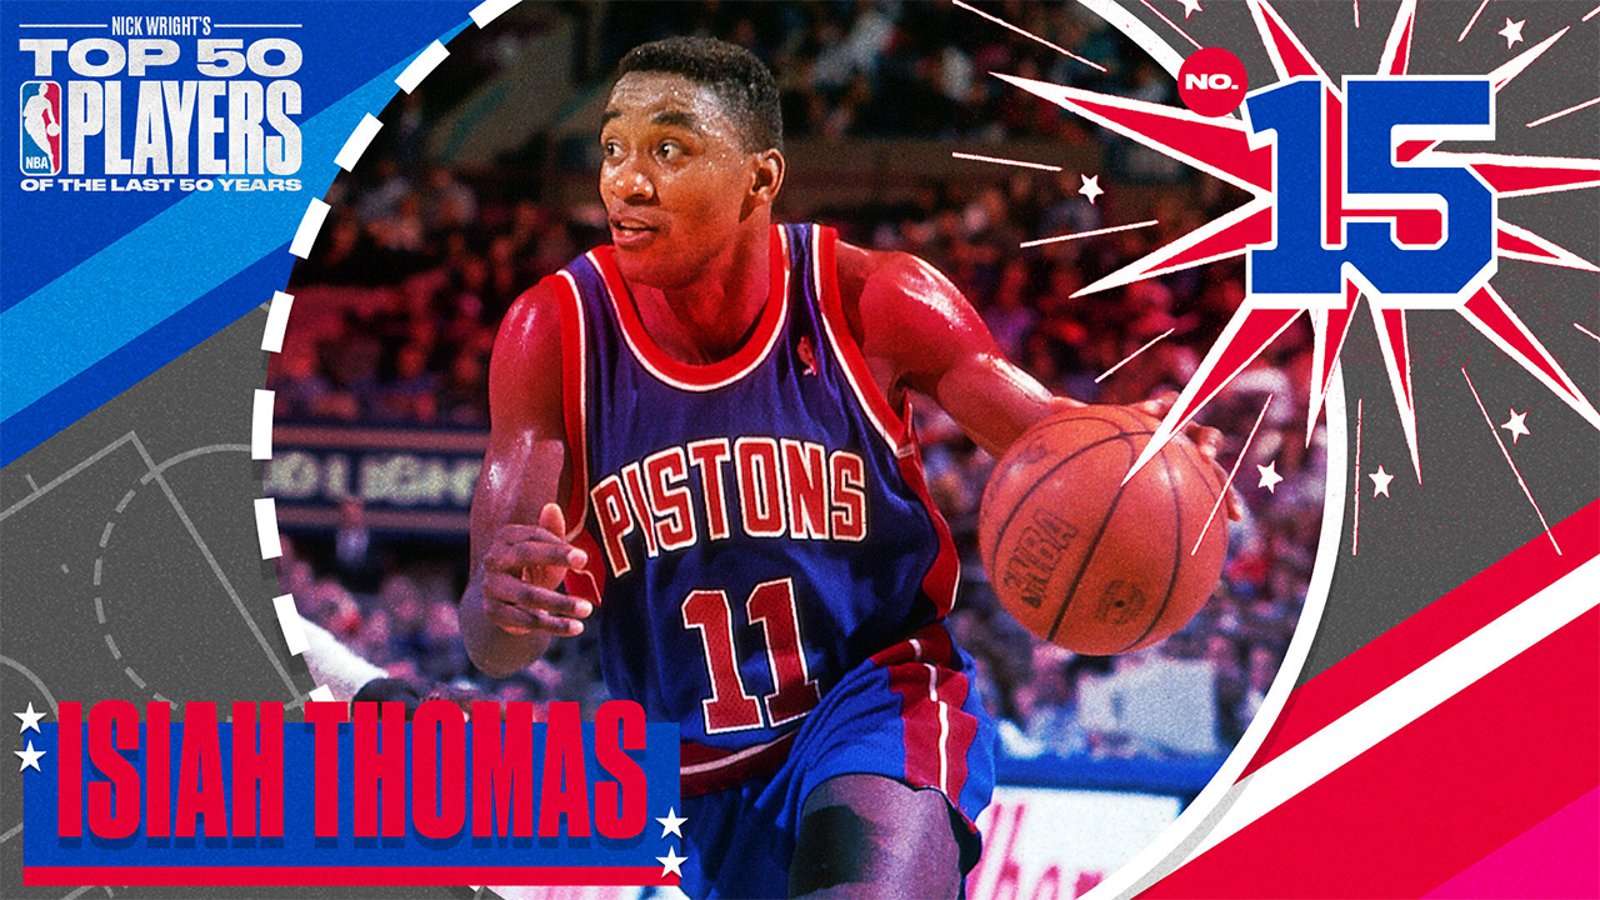 Isiah Thomas is No. 15 on Nick Wright's Top 50 NBA Players of the Last 50 Years